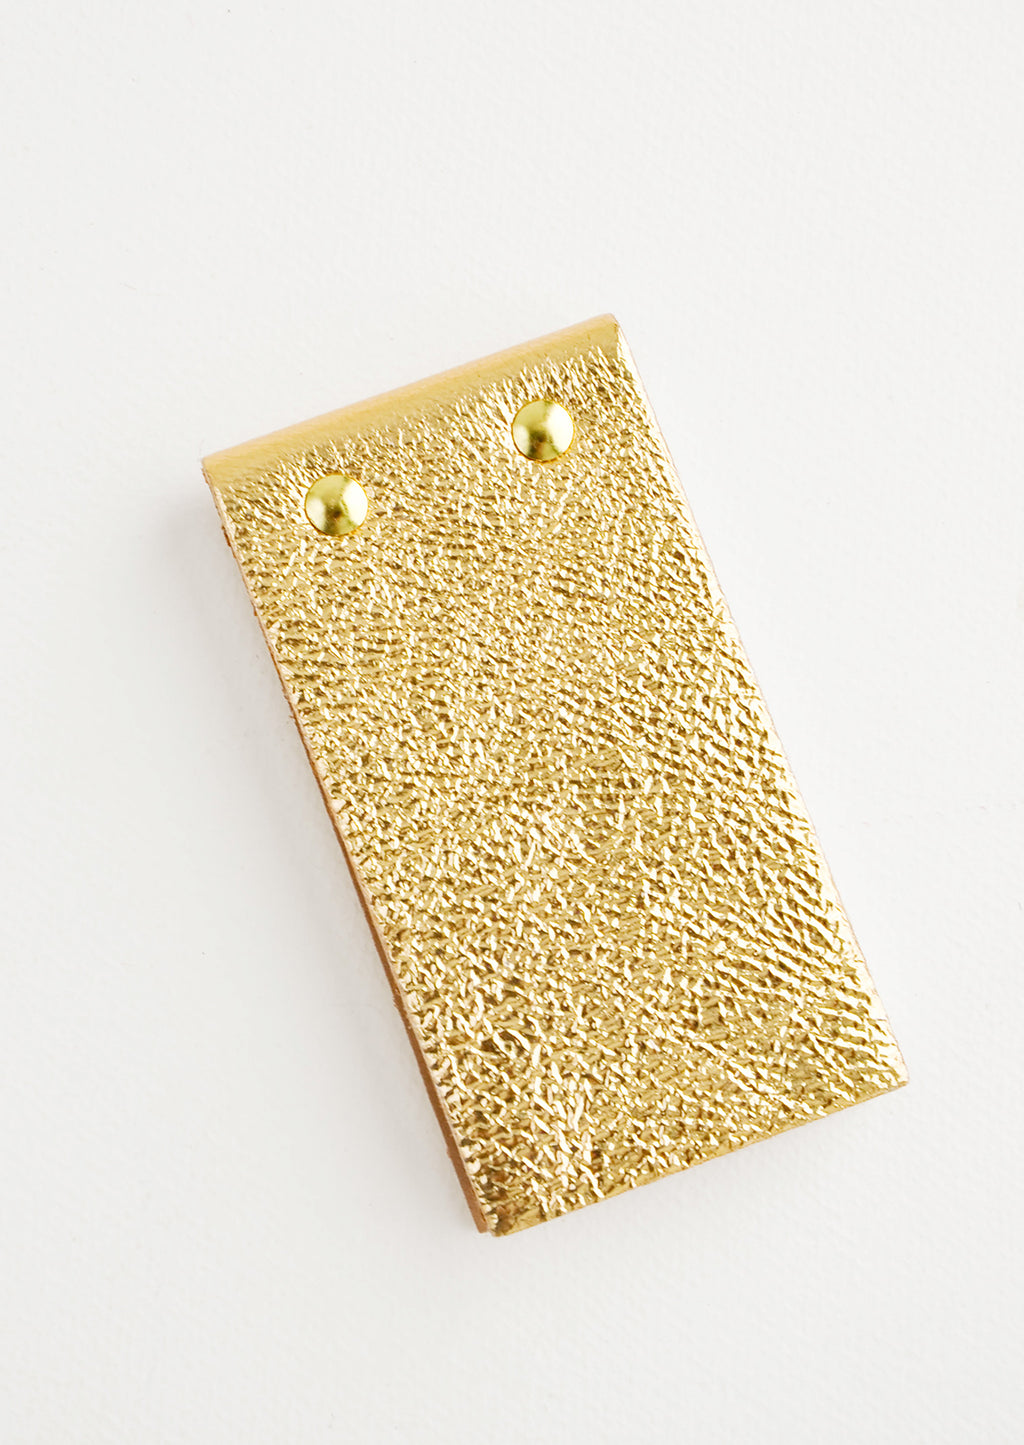 Gold Pebble: Small gold leather notepad with brass grommets.